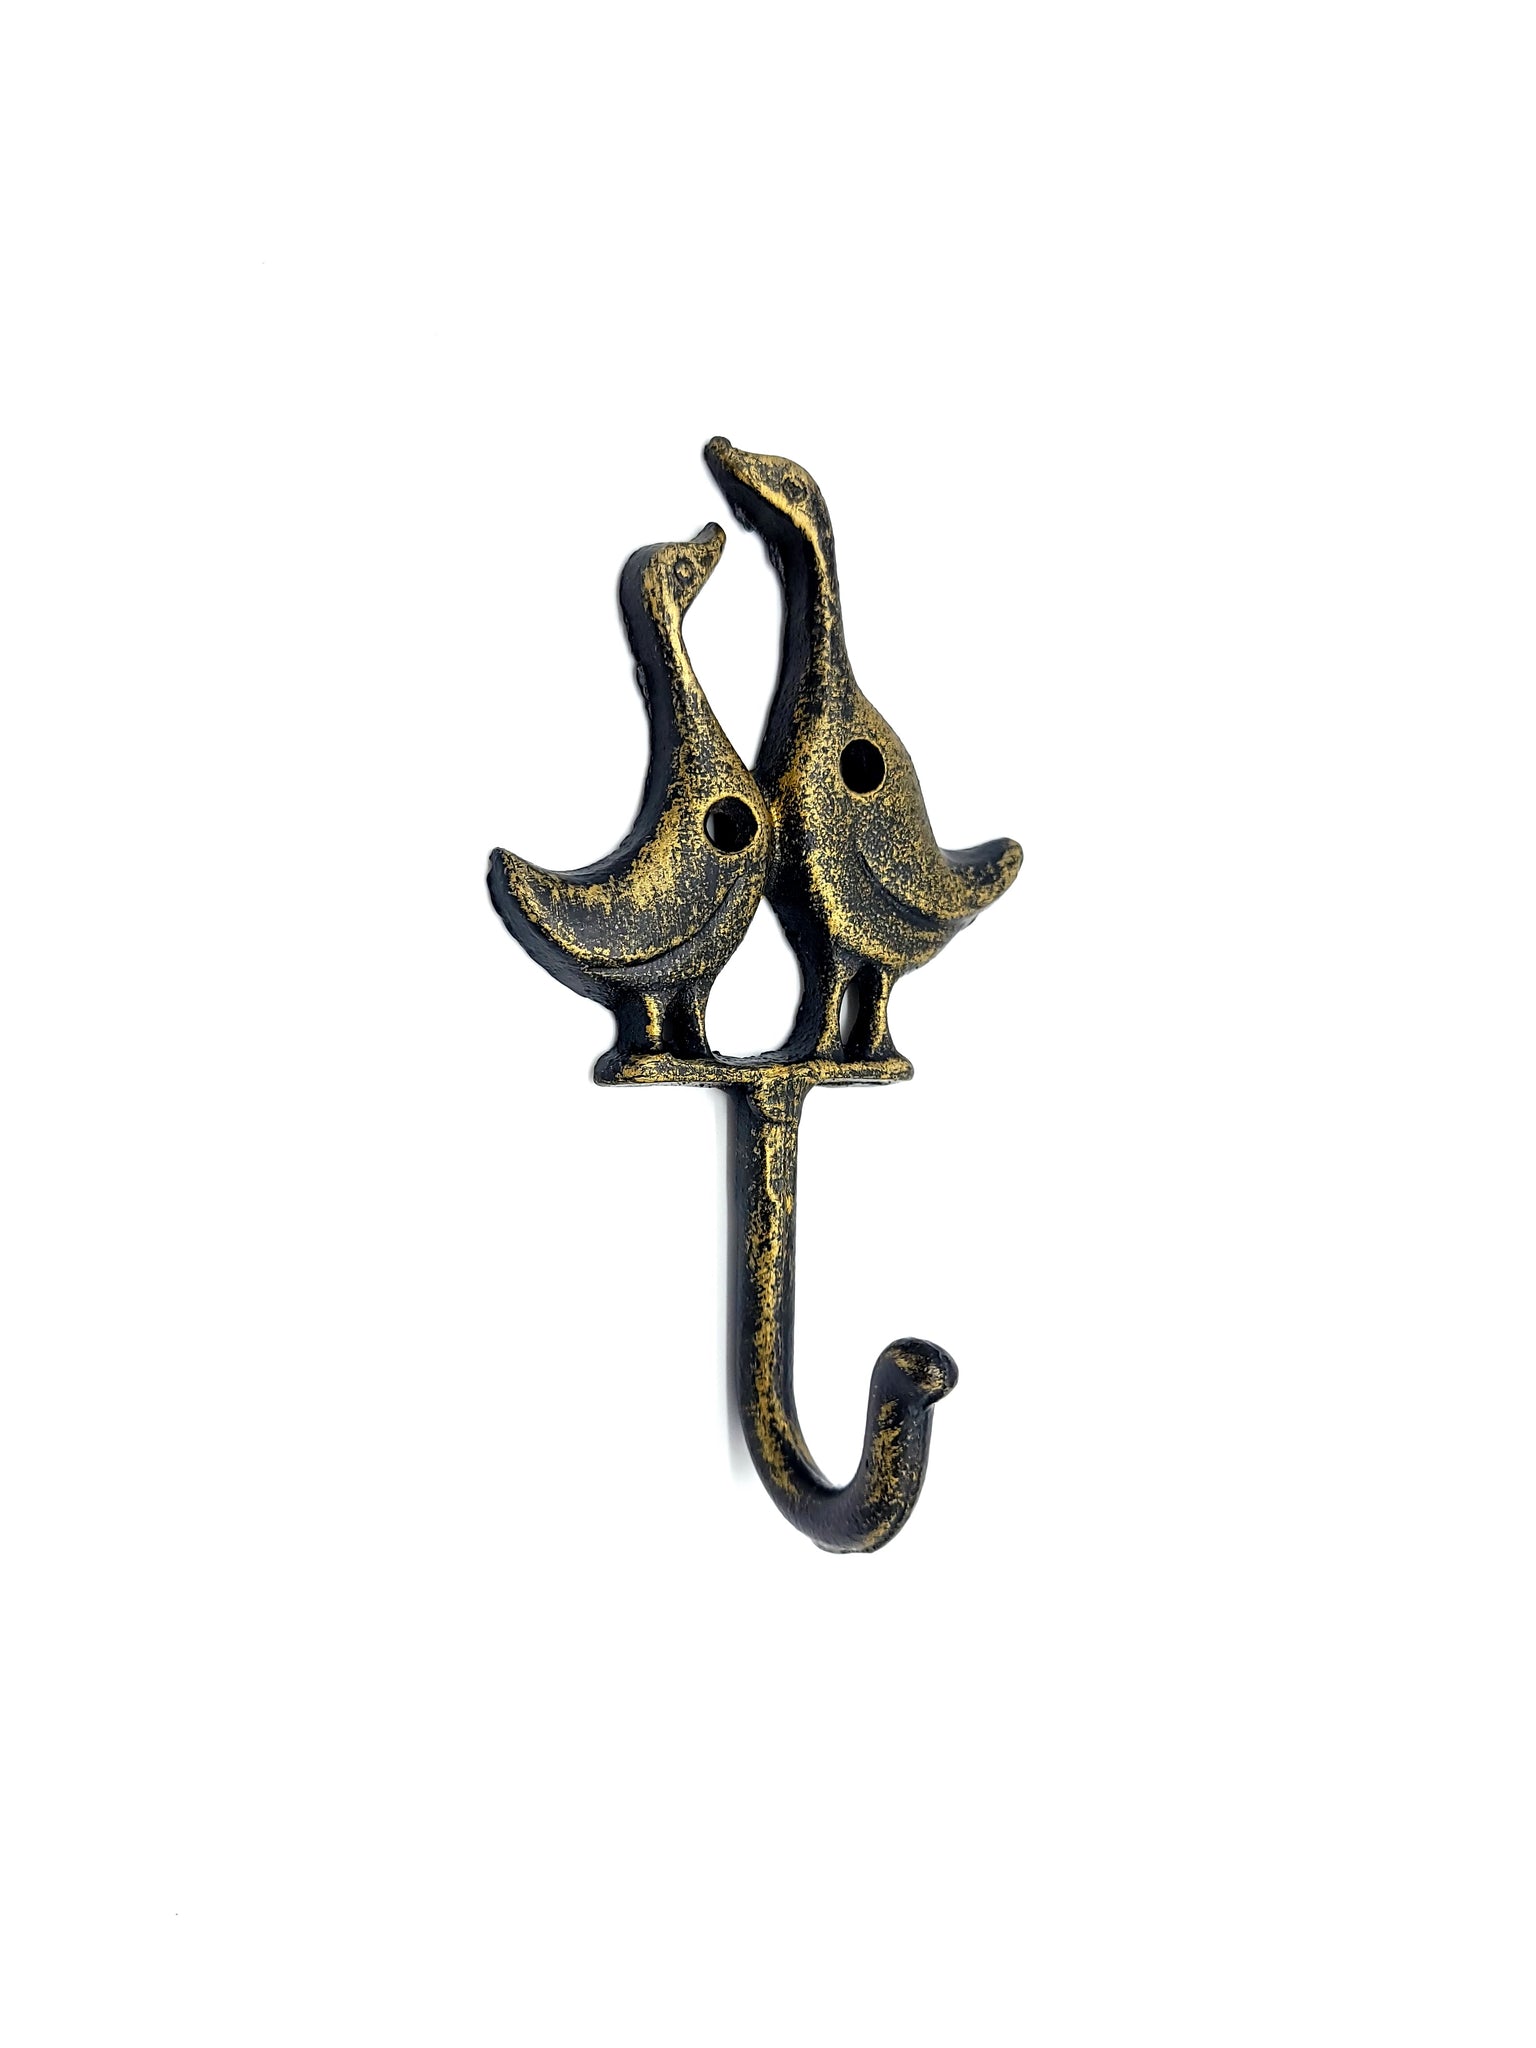 Swallow Wall Hook - Flying Bird Hook - Shop by colour